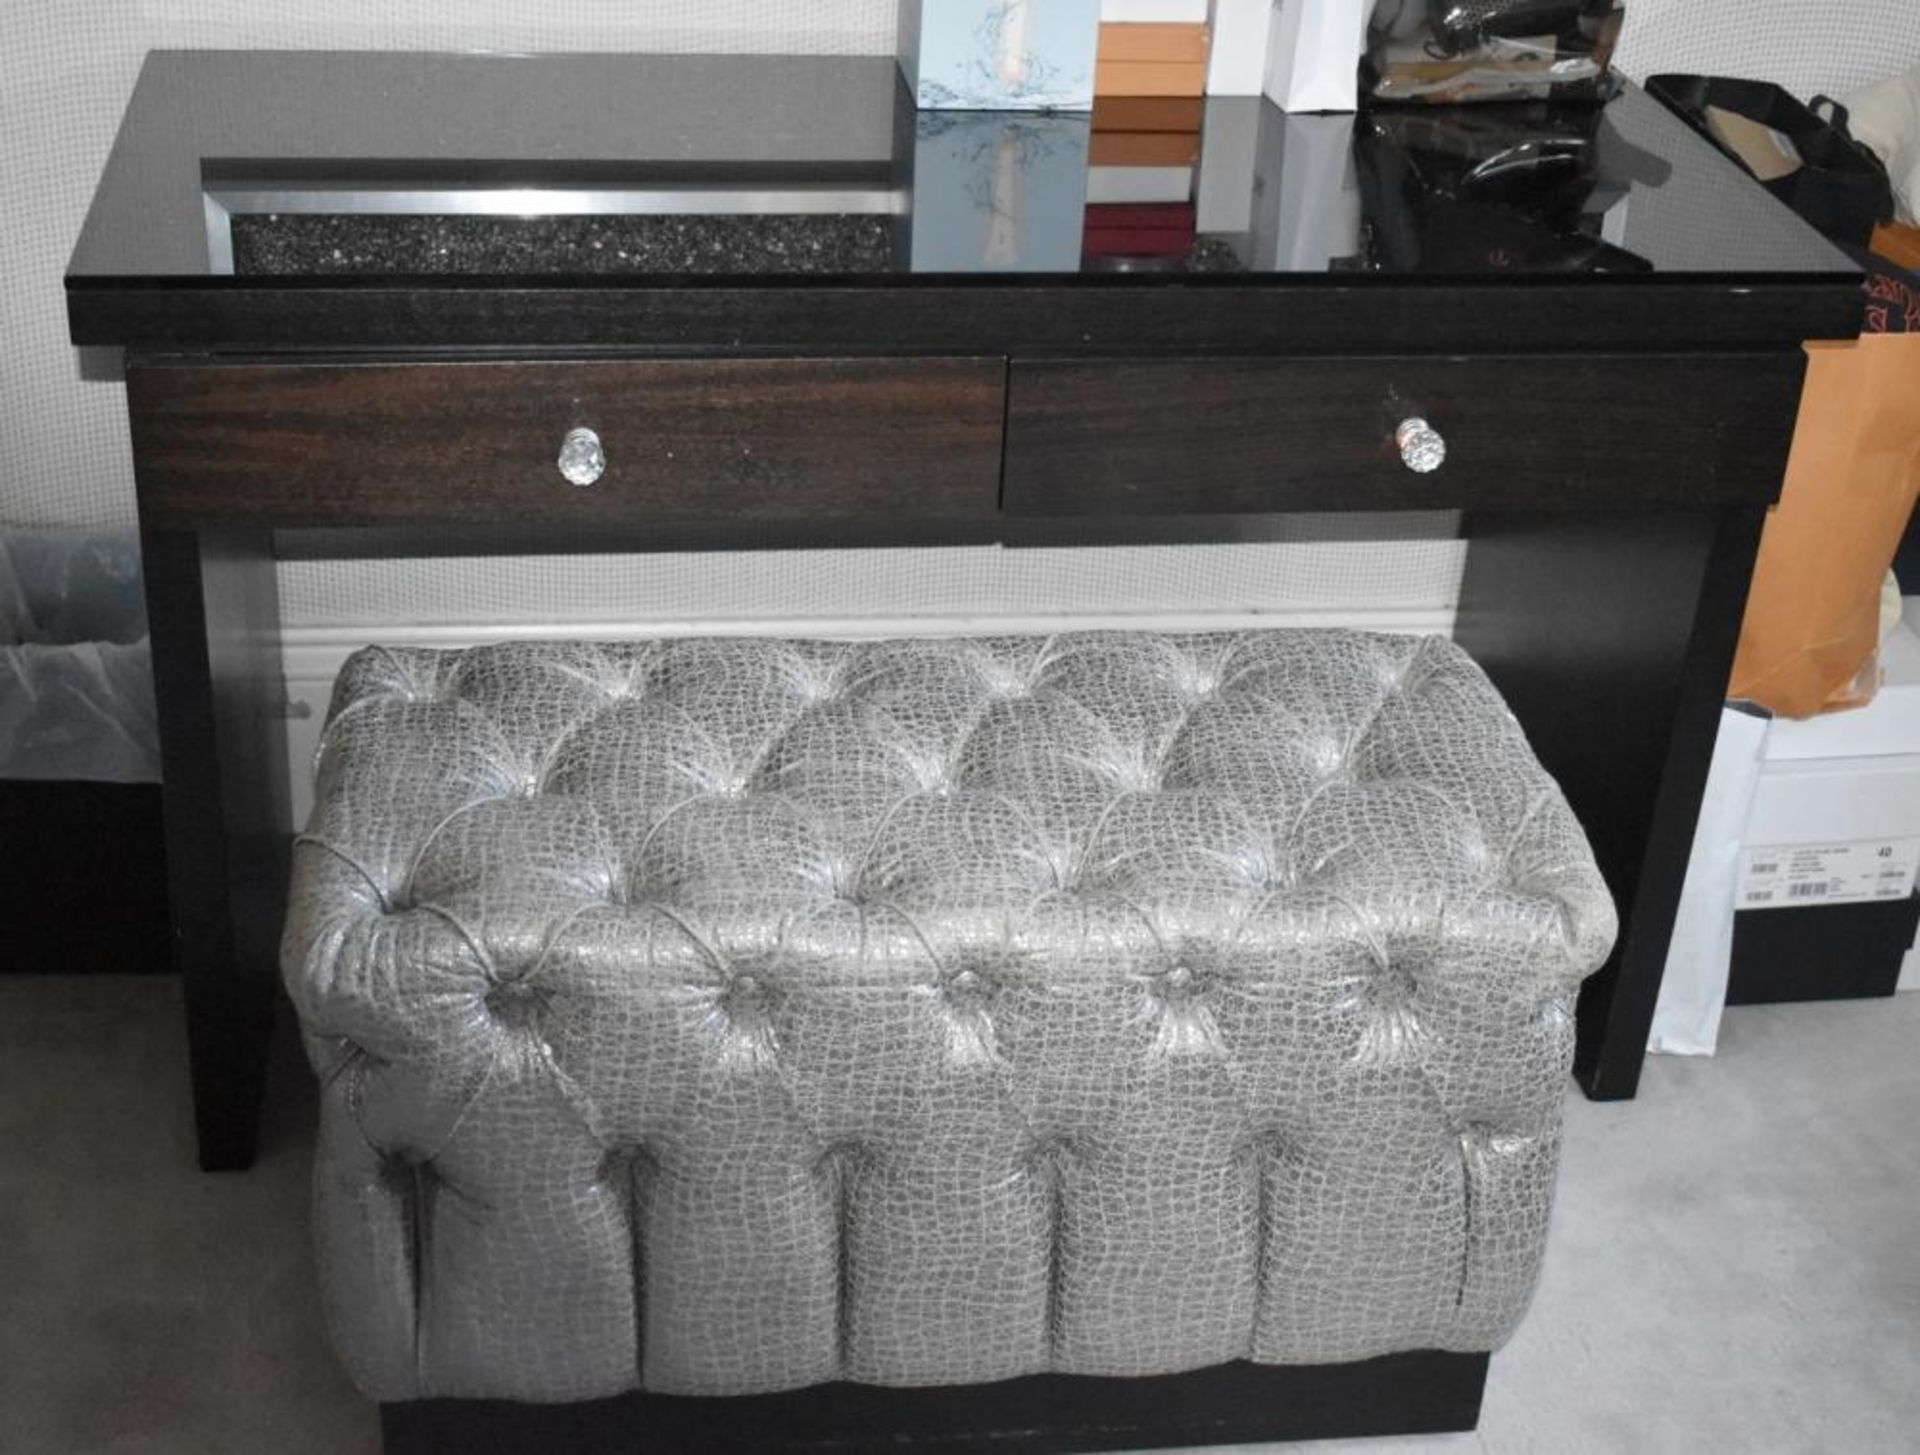 1 x Bedroom Furniture Set Including Dressing Table, 2 x Bedside Units And More - Ref: ABR063 / GR - - Image 6 of 9